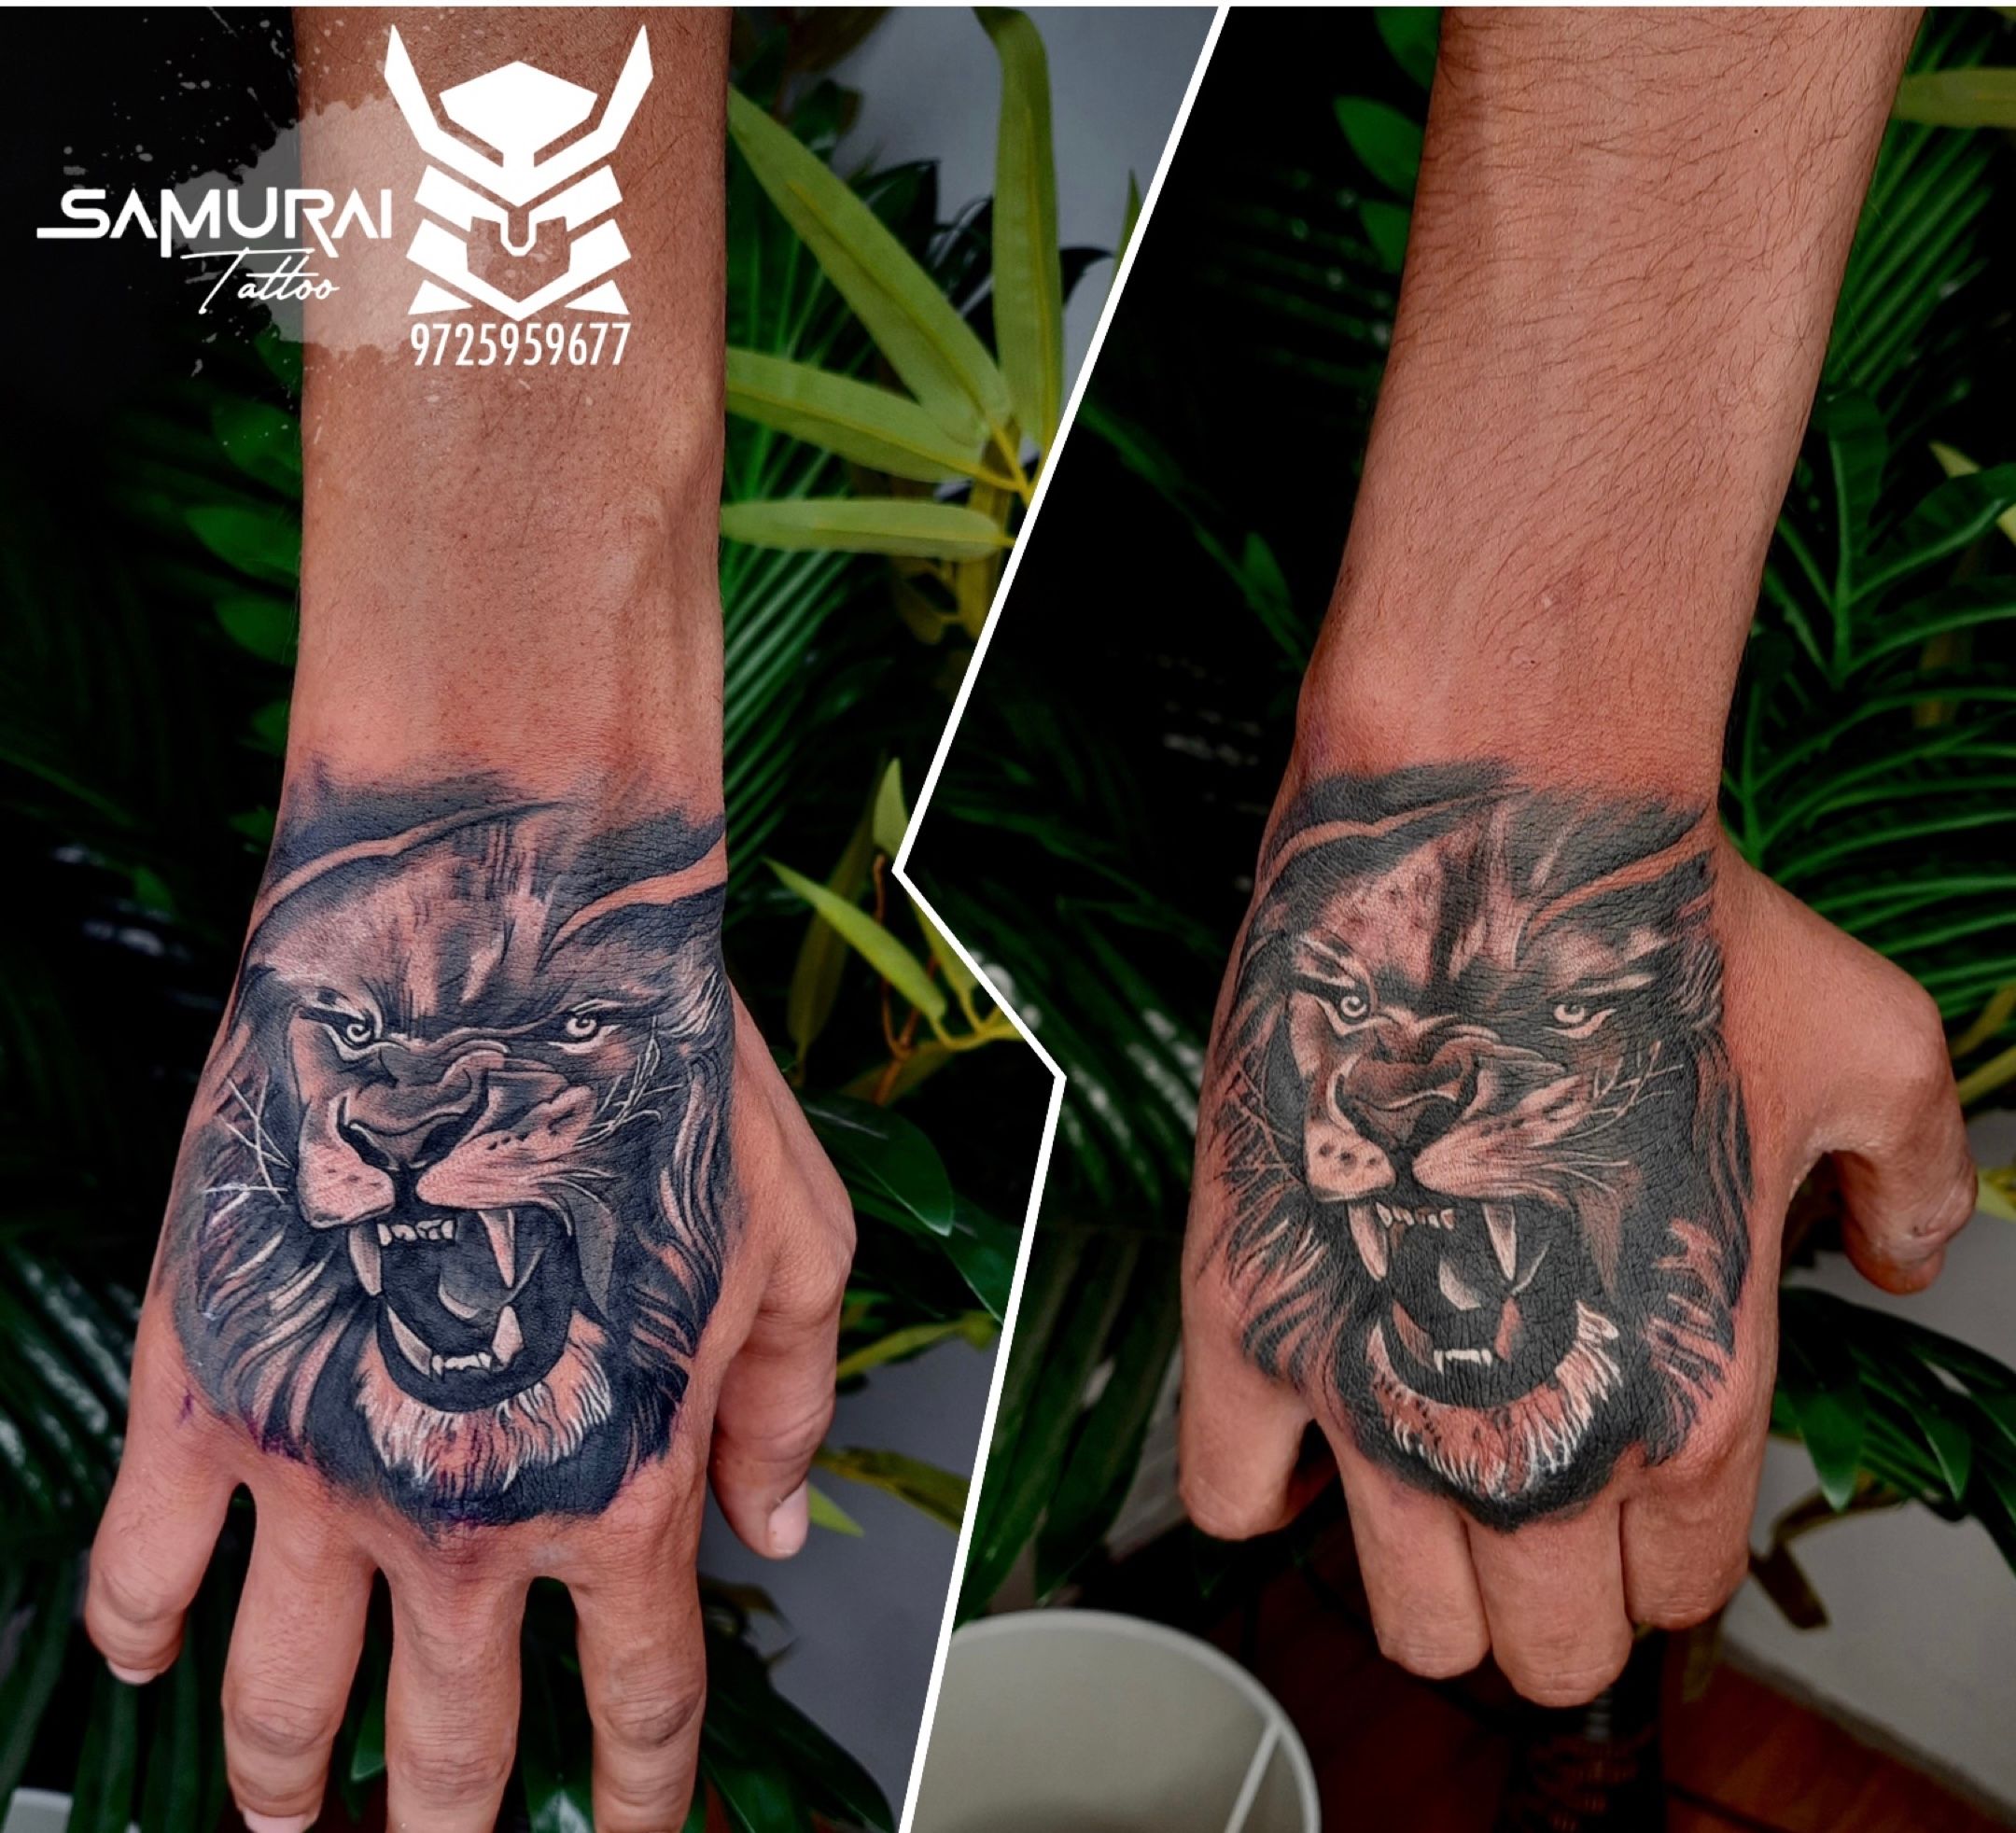 Lion Tattoos: What Do They Mean? (With Pictures) - Iron & Ink Tattoo